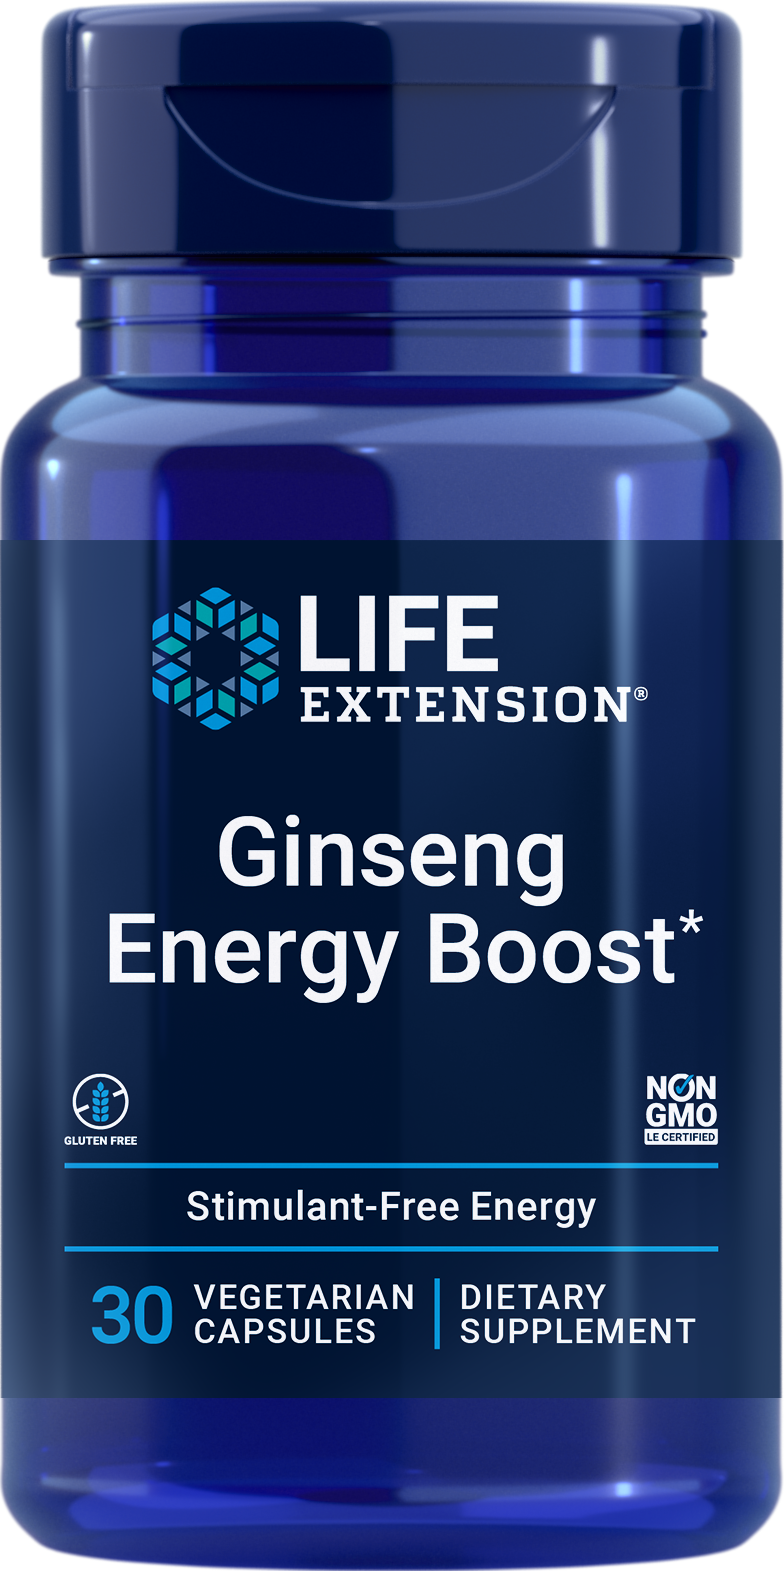 Ginseng Energy Boost